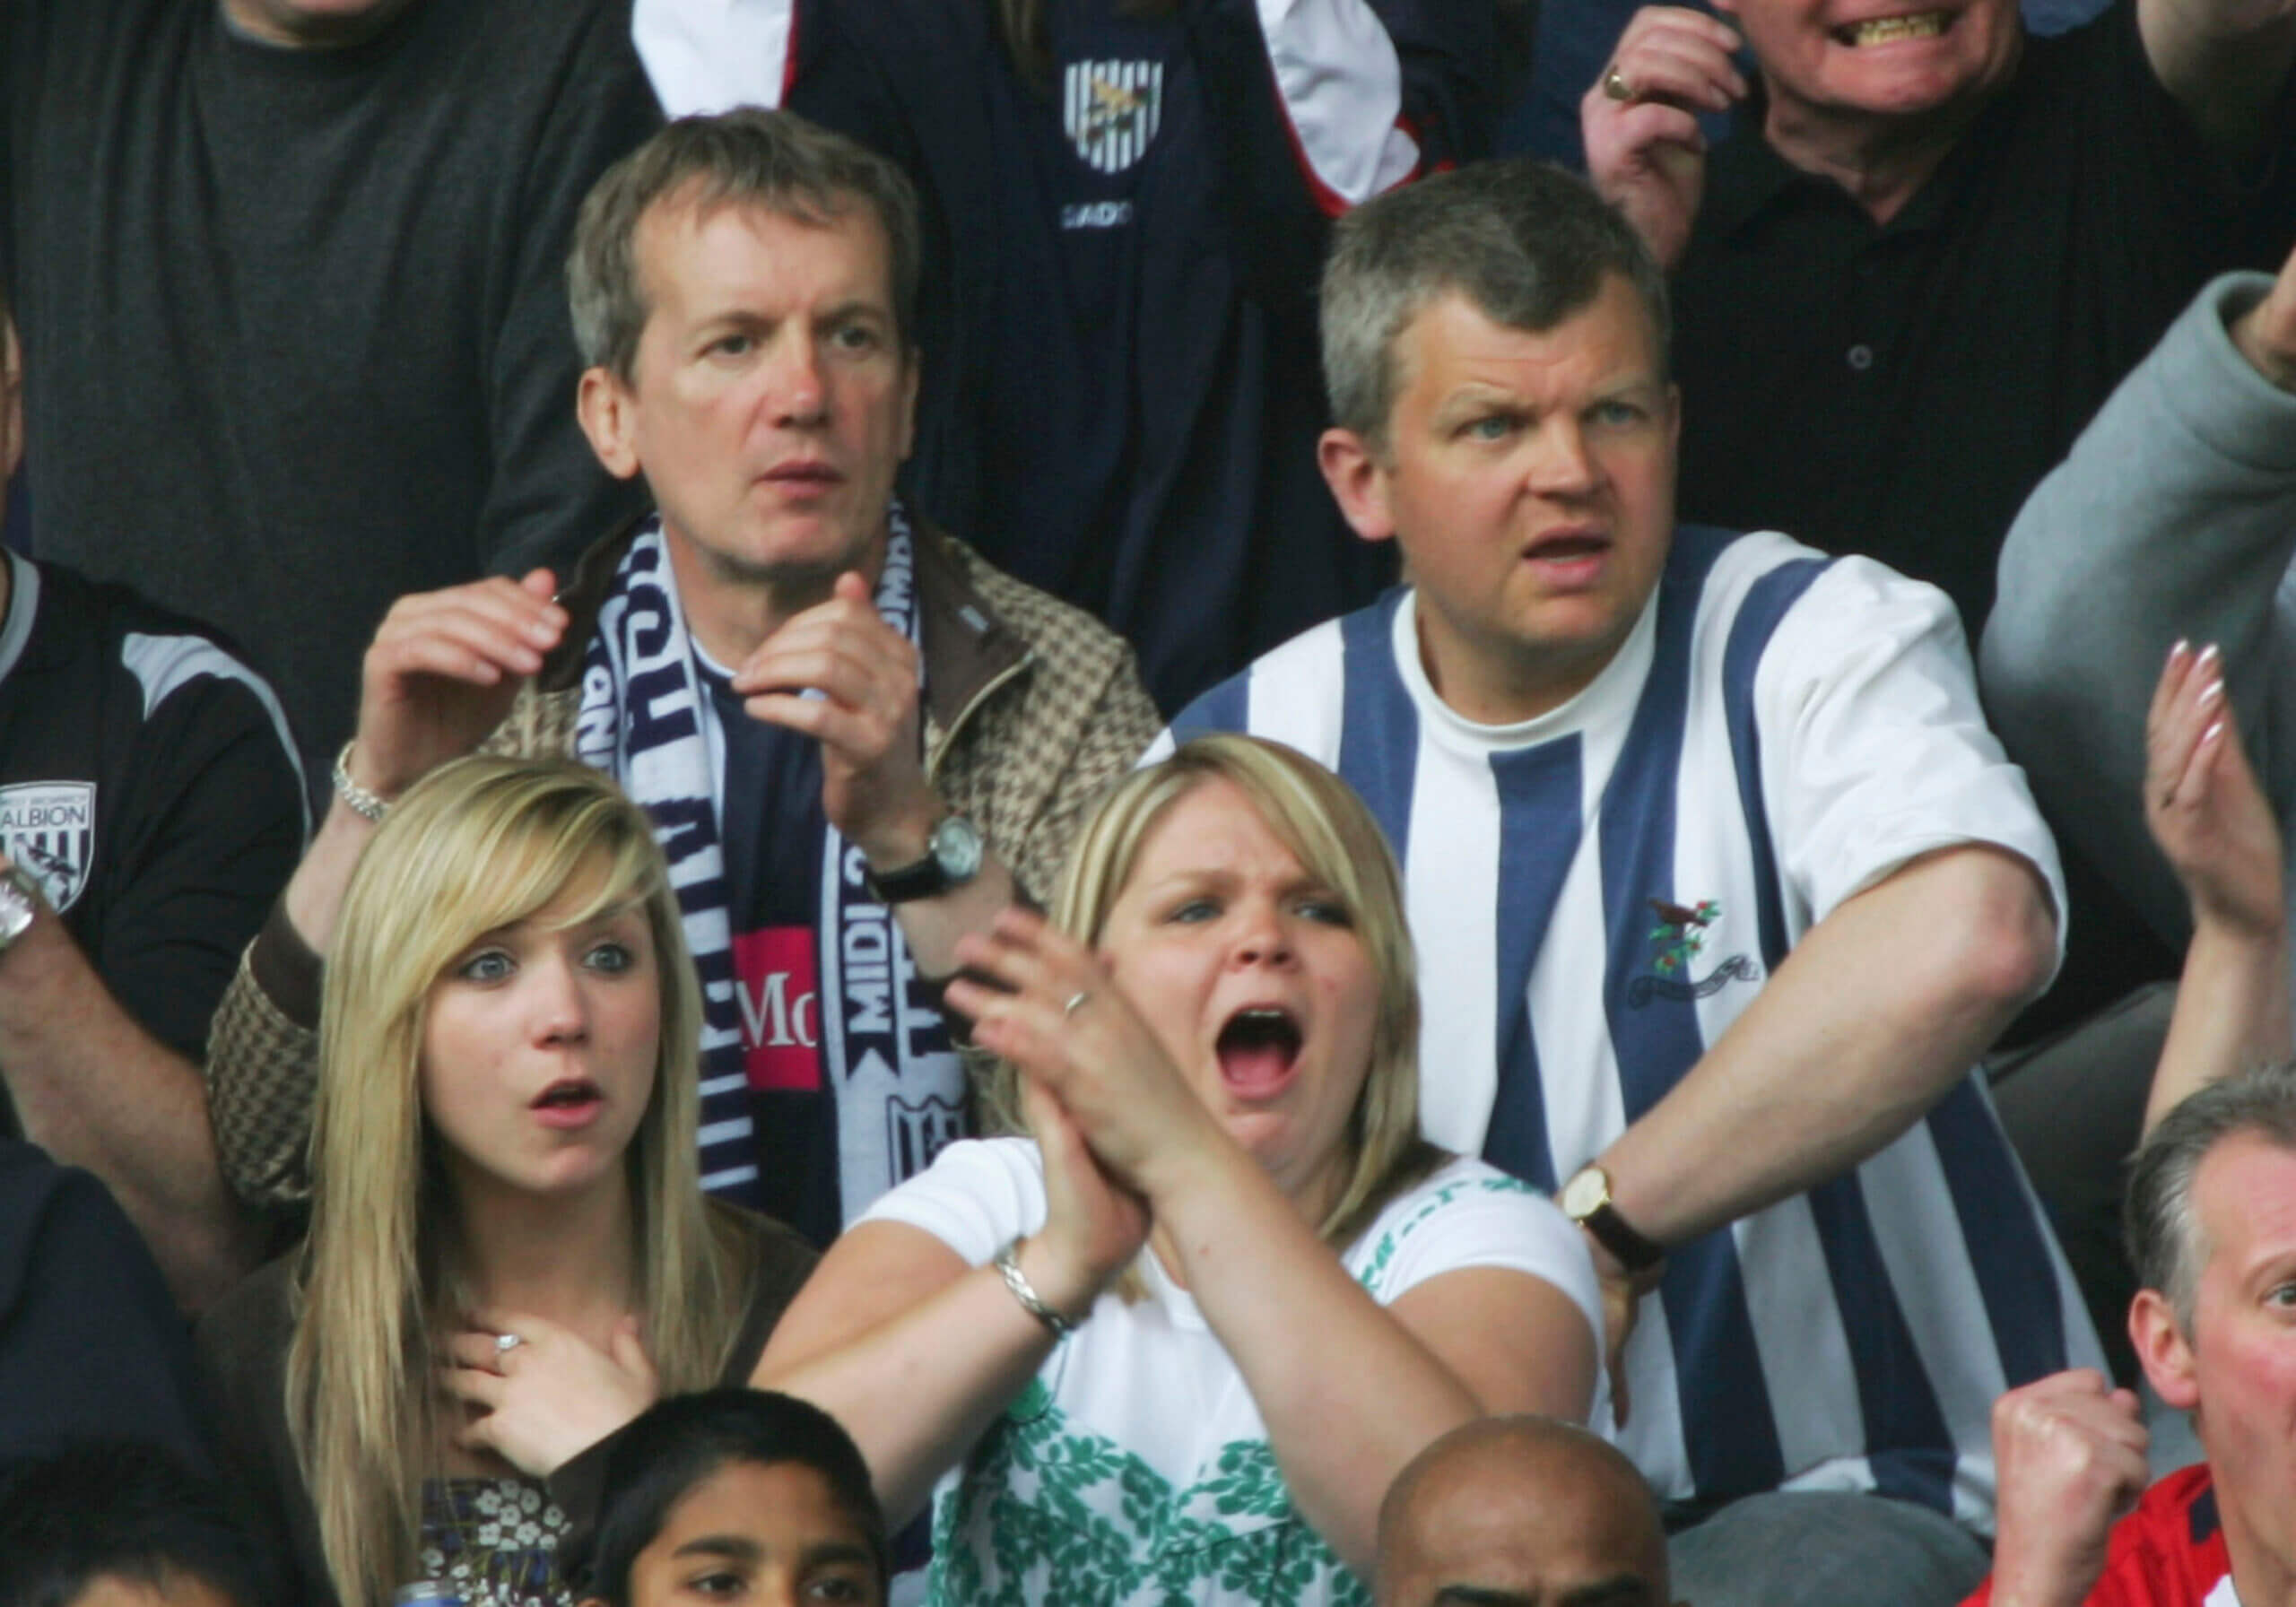 BIG LOSS: Fans Cry Out This is Not The Best Option To Let Him Go As tWest Brom Announce To Sell Key Player